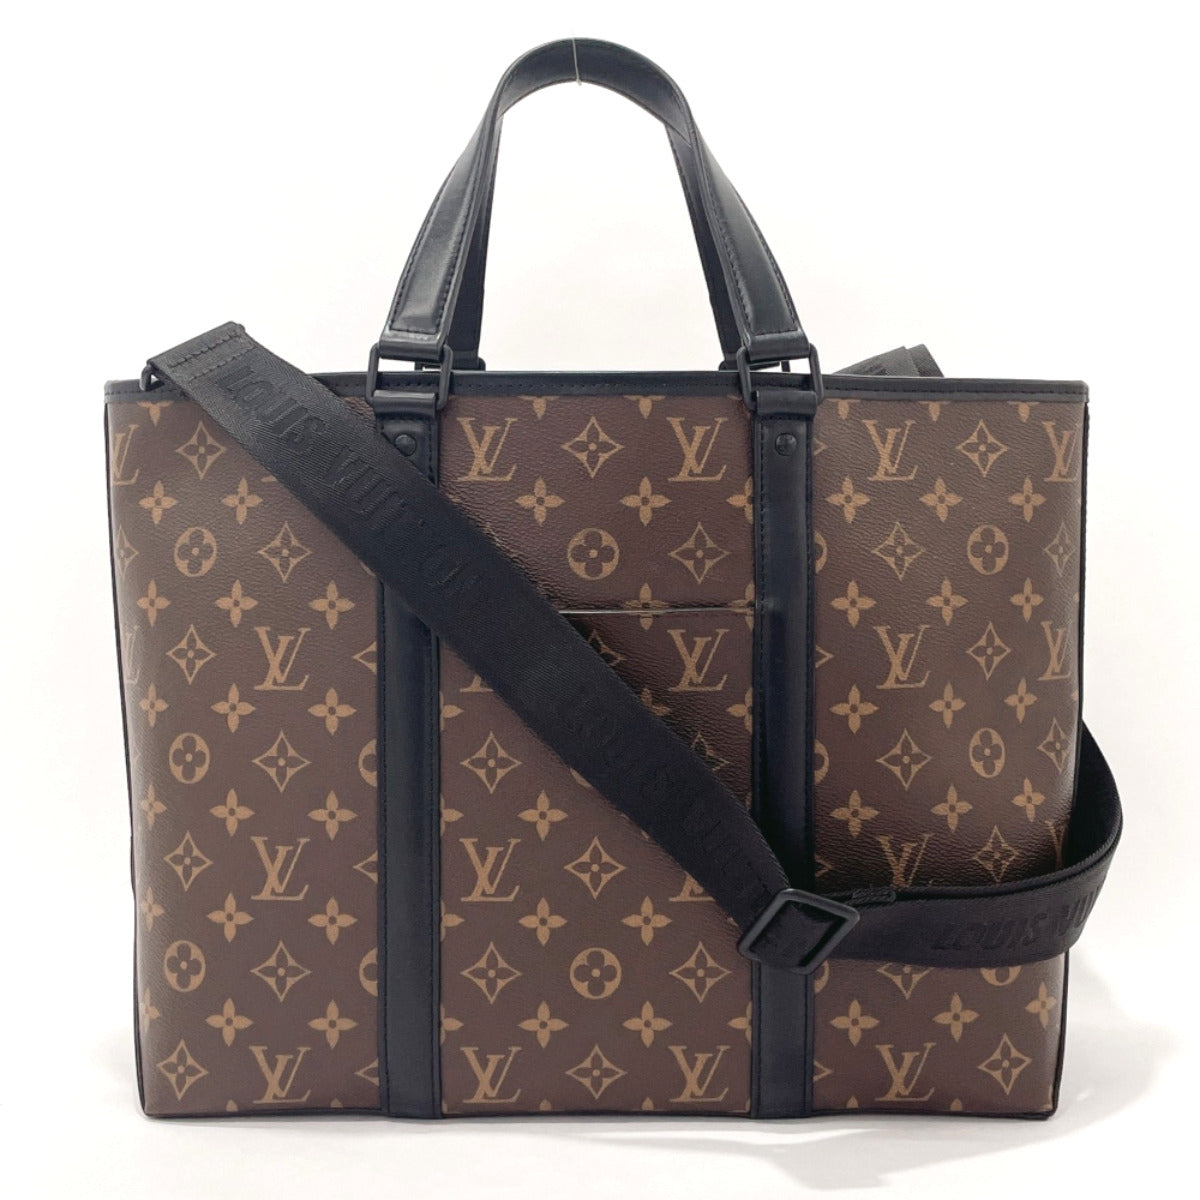 Louis Vuitton Weekend Tote PM Canvas Tote Bag M45734 in Good condition